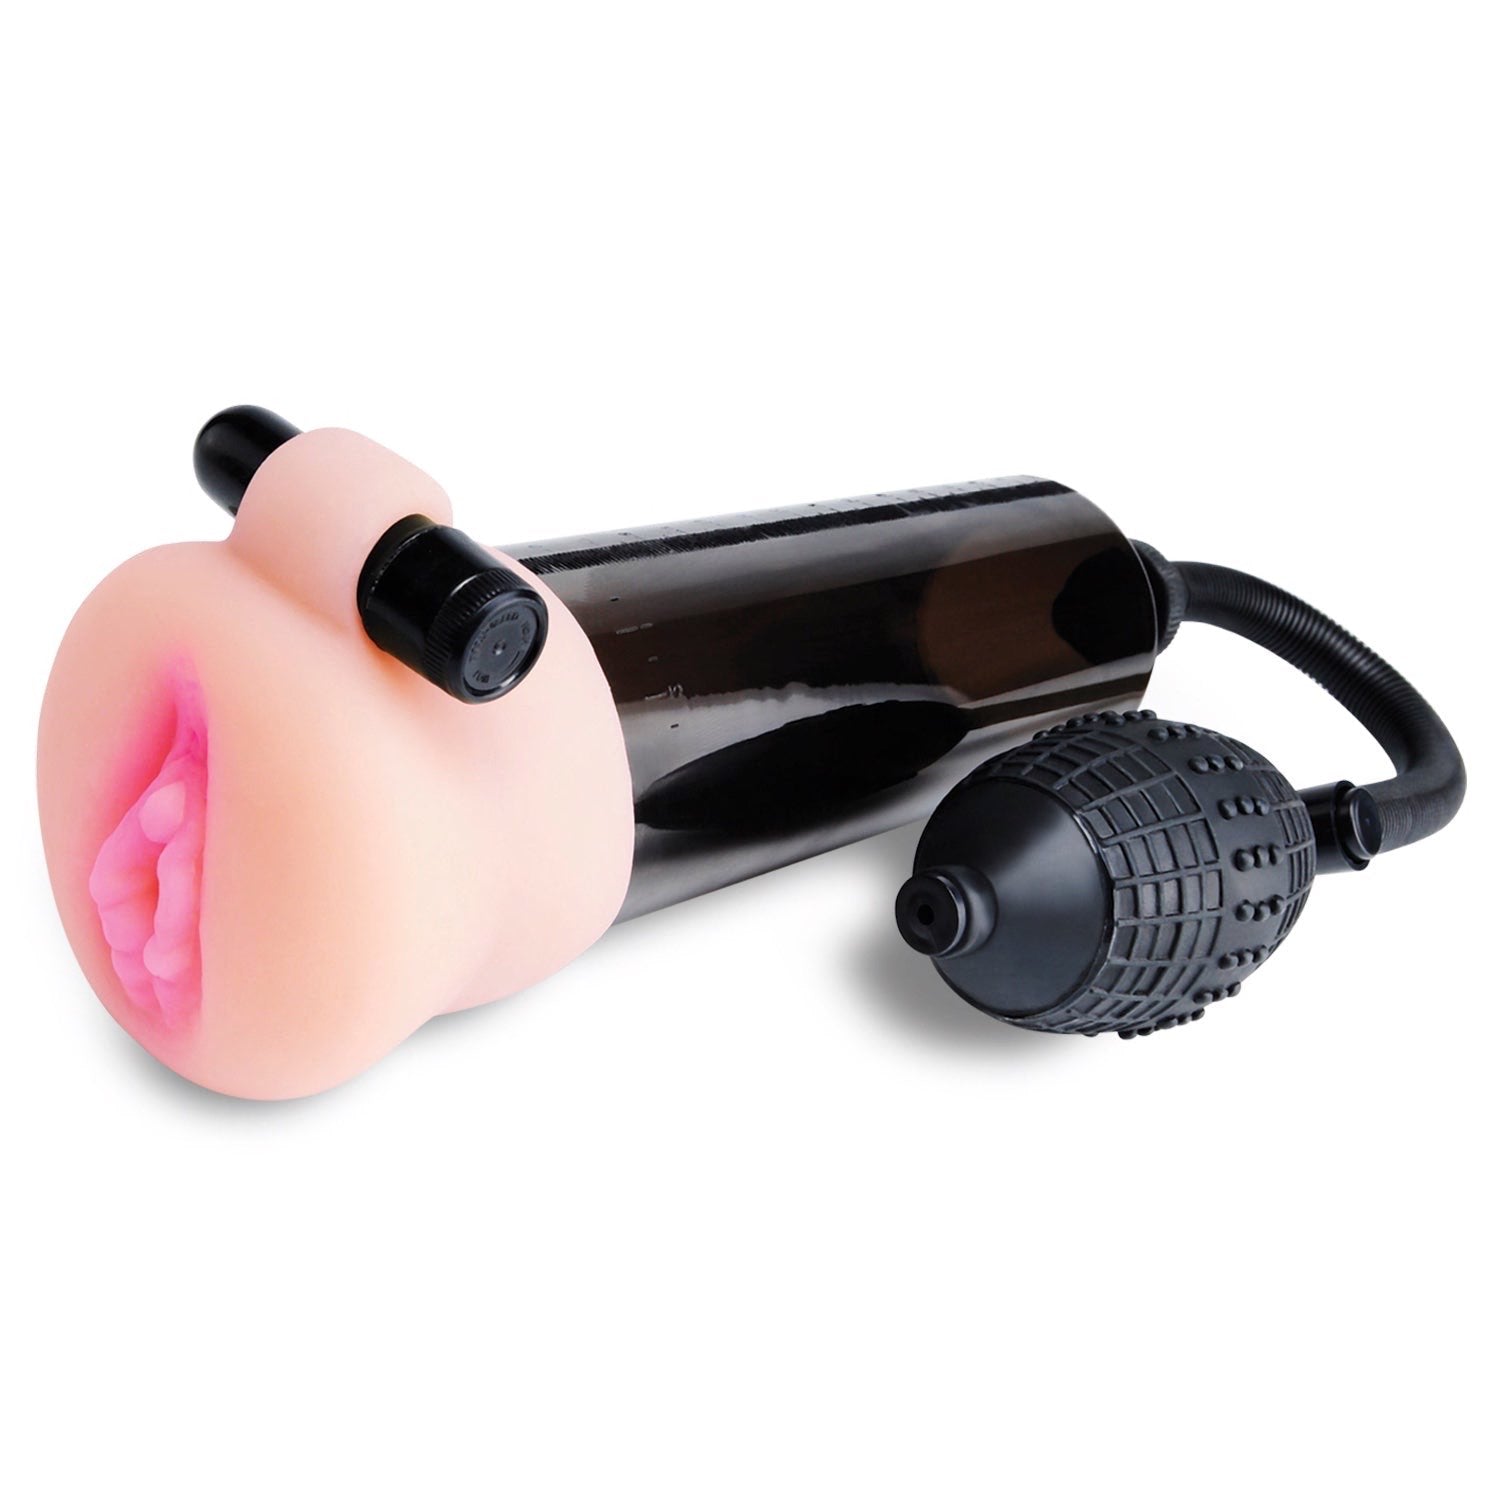 Pump Worx Travel Trio Pump Set - Smoke Vibrating Penis Pump with 3 Penis Sleeves by Pipedream